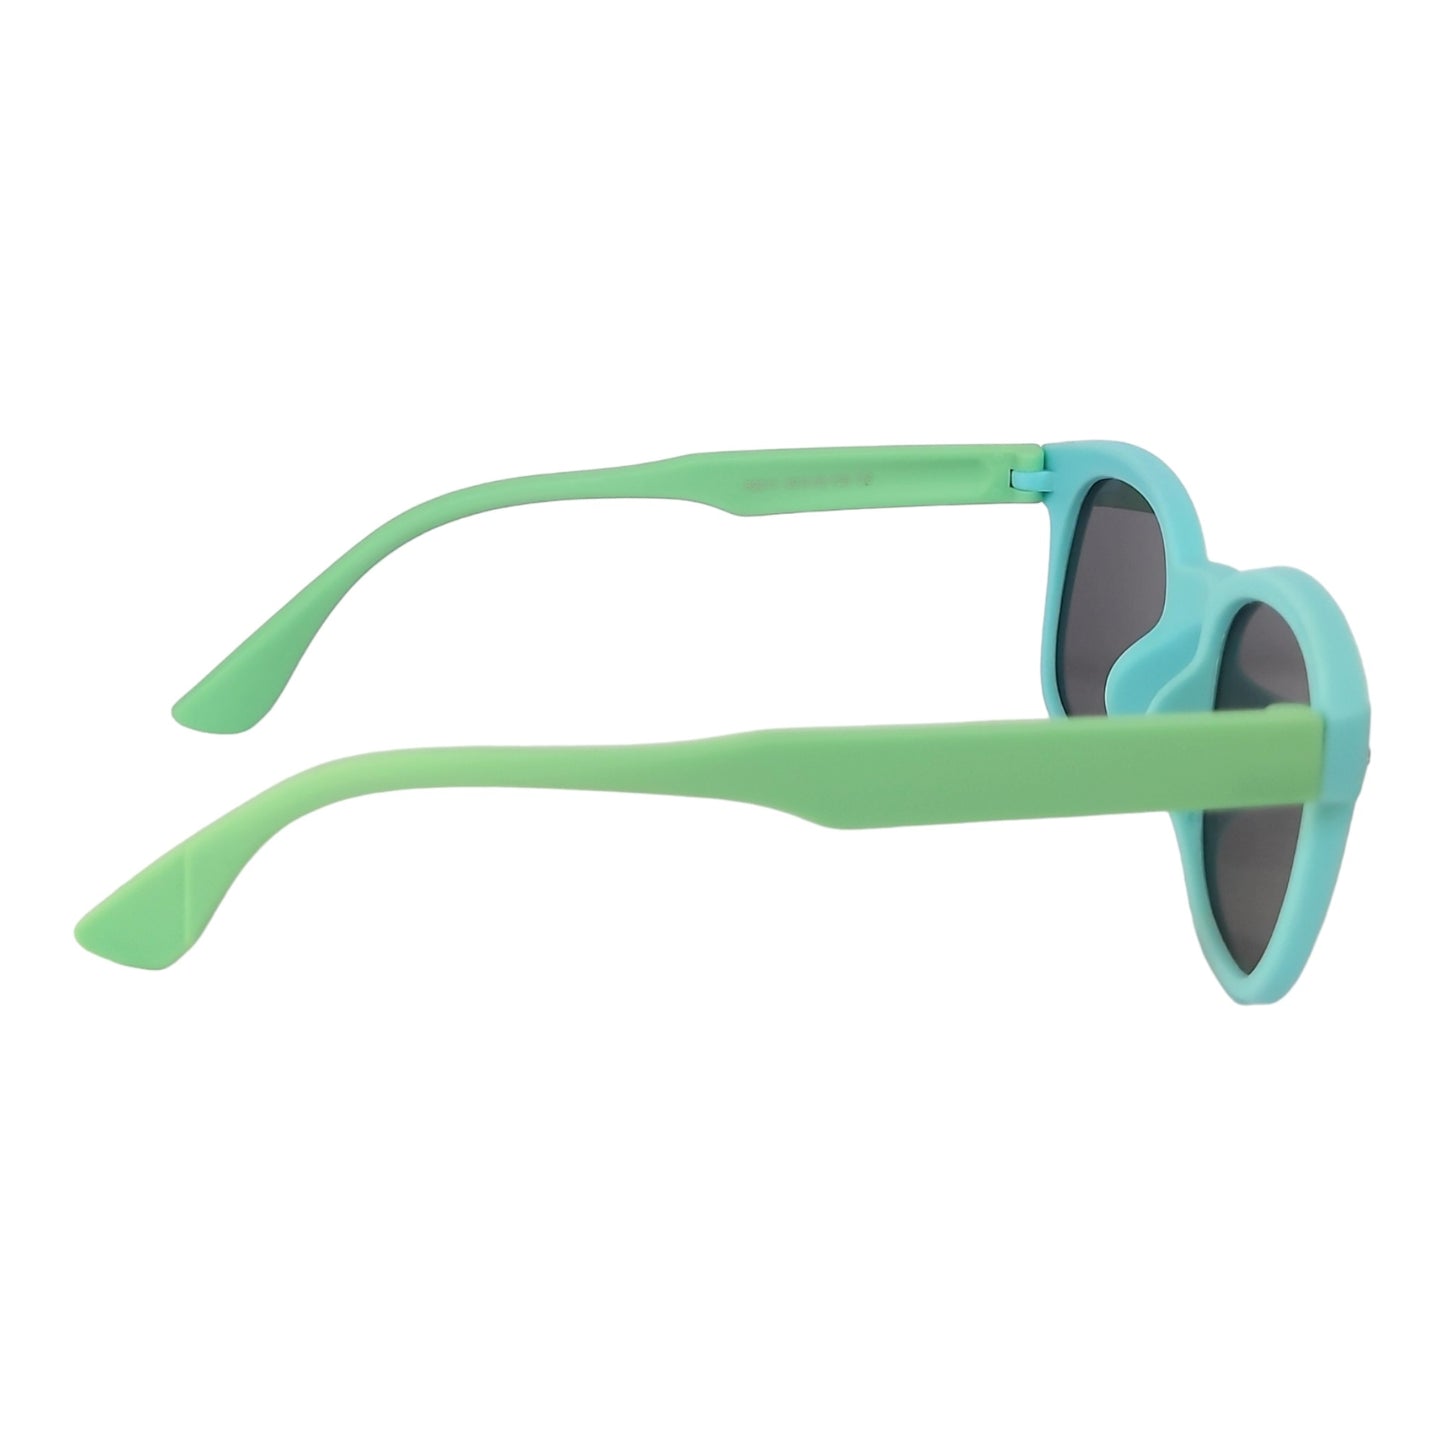 Stylish Kids Polarized Sunglasses for Shades Age 4-9 Years Old, Girl or Boy  | affaires-9011 - Sky Blue - Green